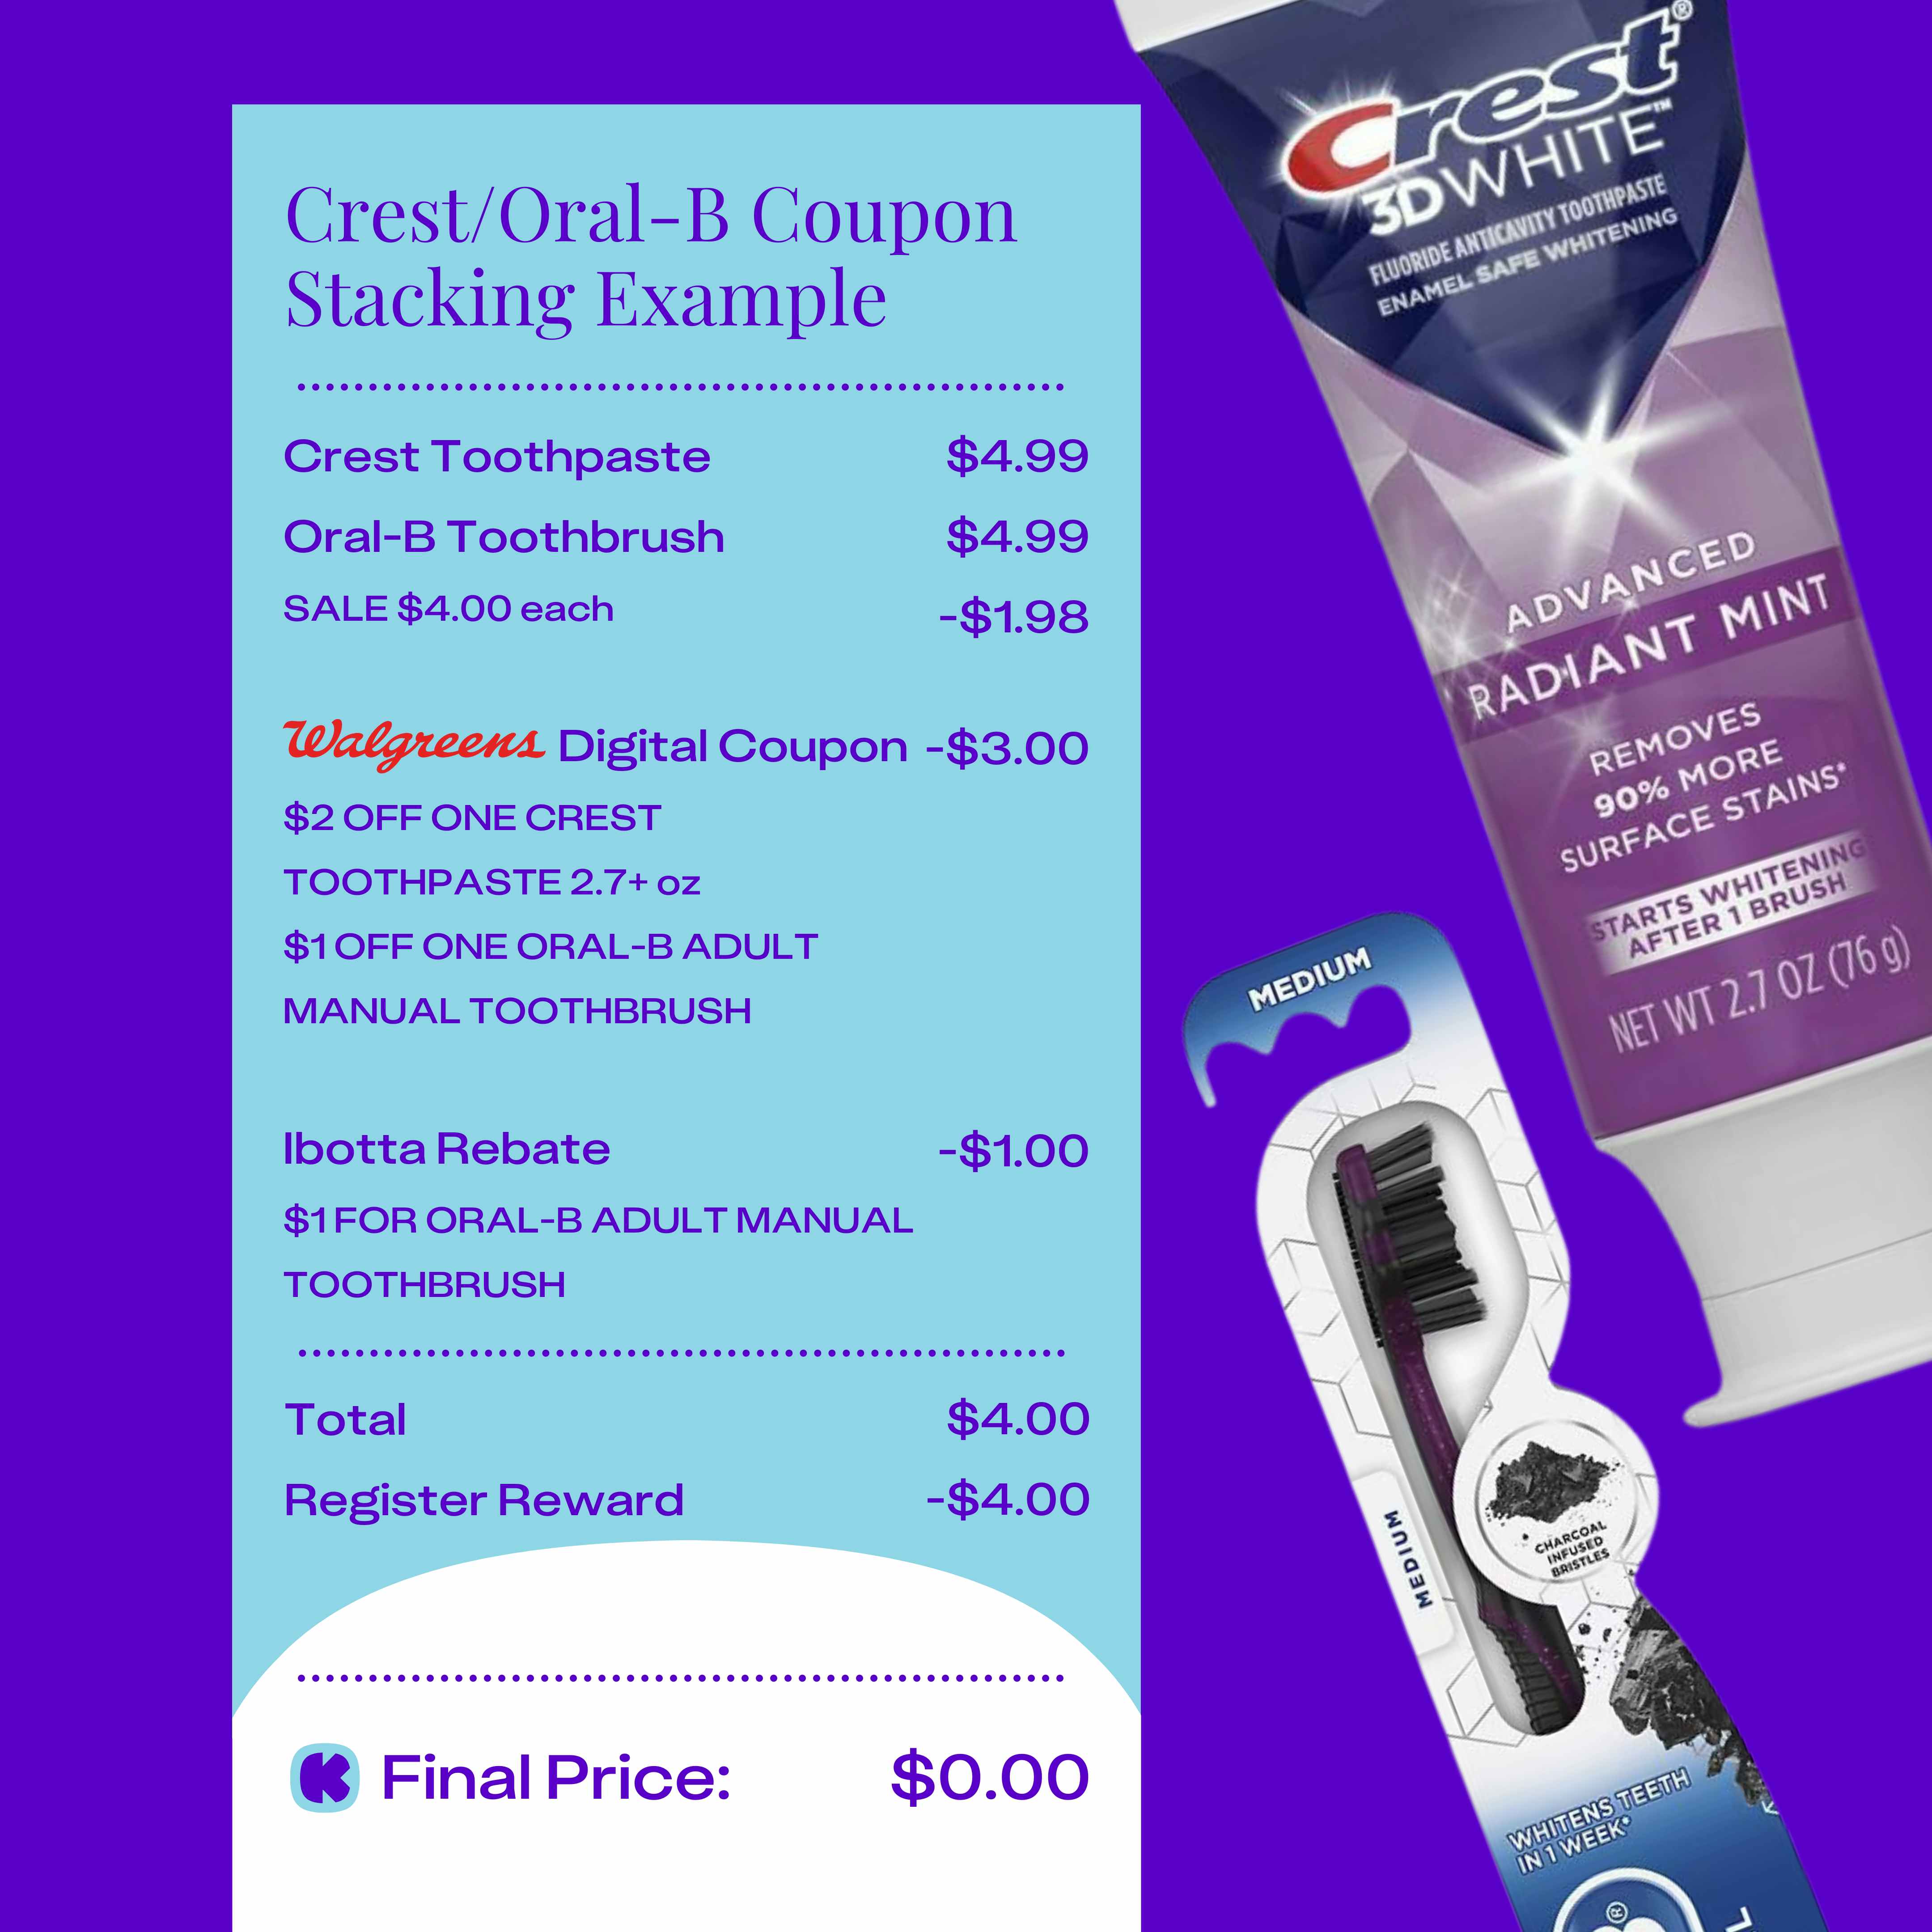 Walgreens coupon stacking example using sale prices, myWalgreens account coupons, and Register Rewards.